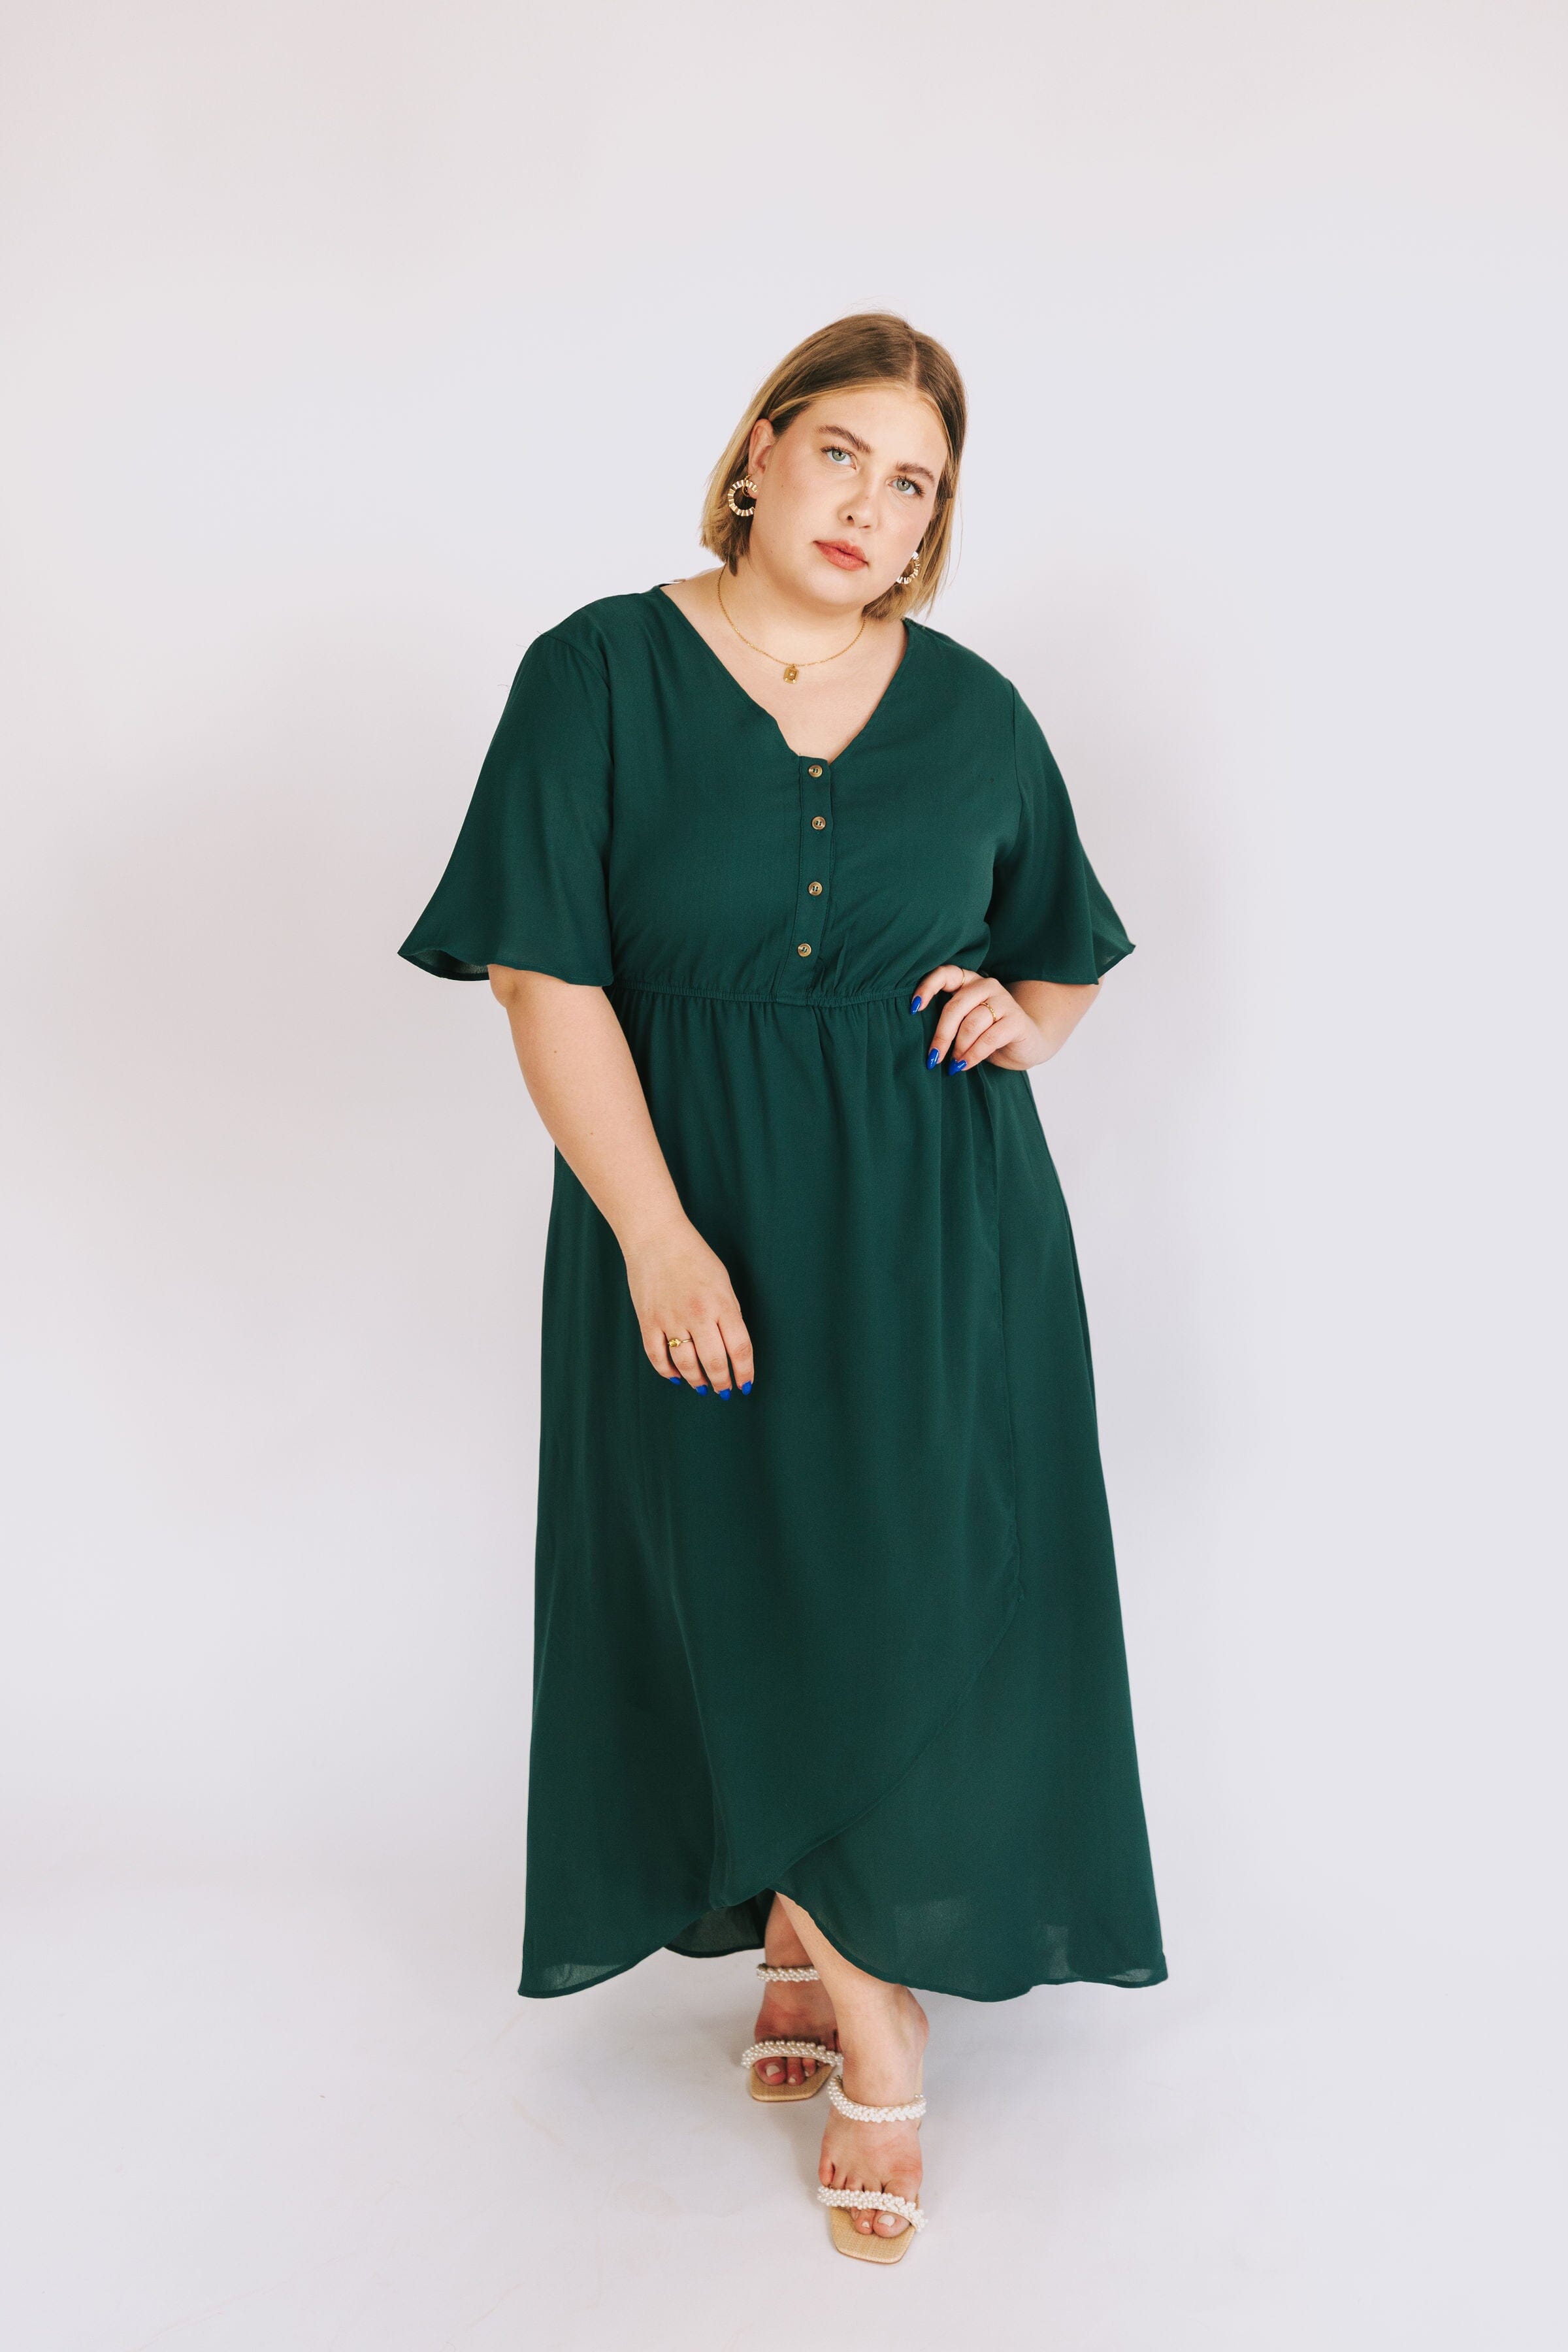 ONE LOVED BABE - Windsor Dress - 11 Colors 